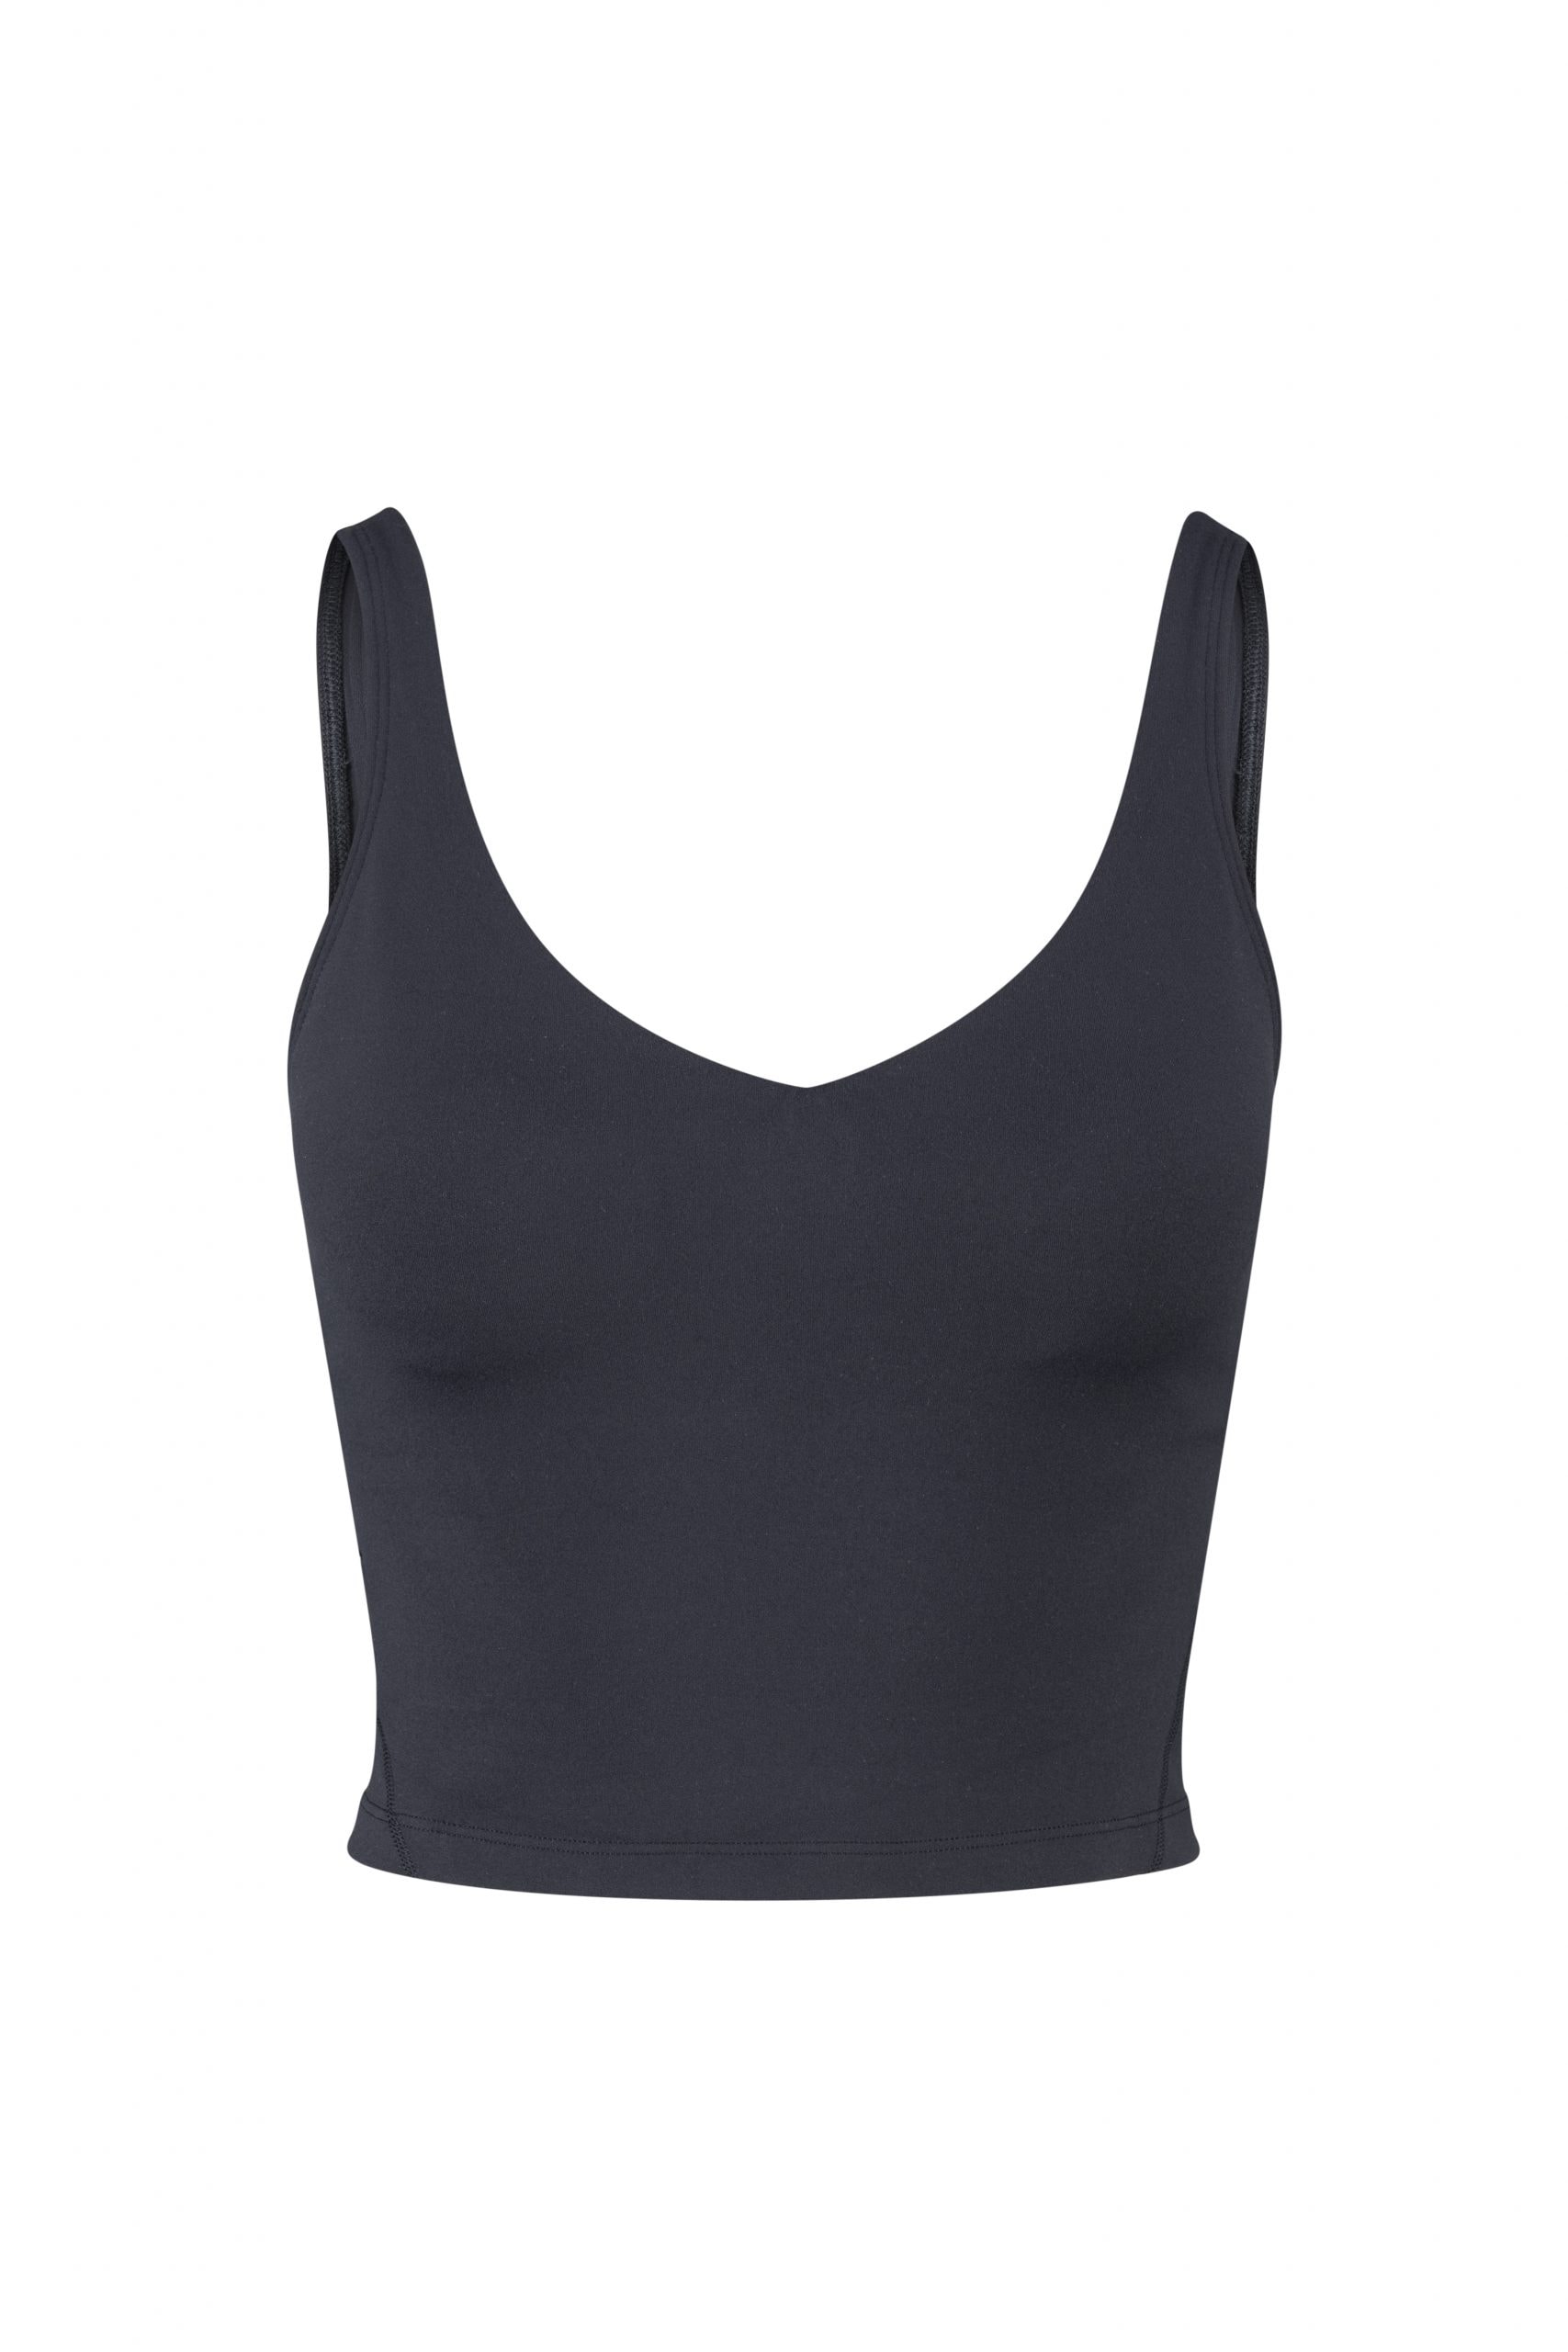  Lululemon Align™ Collection Get into it